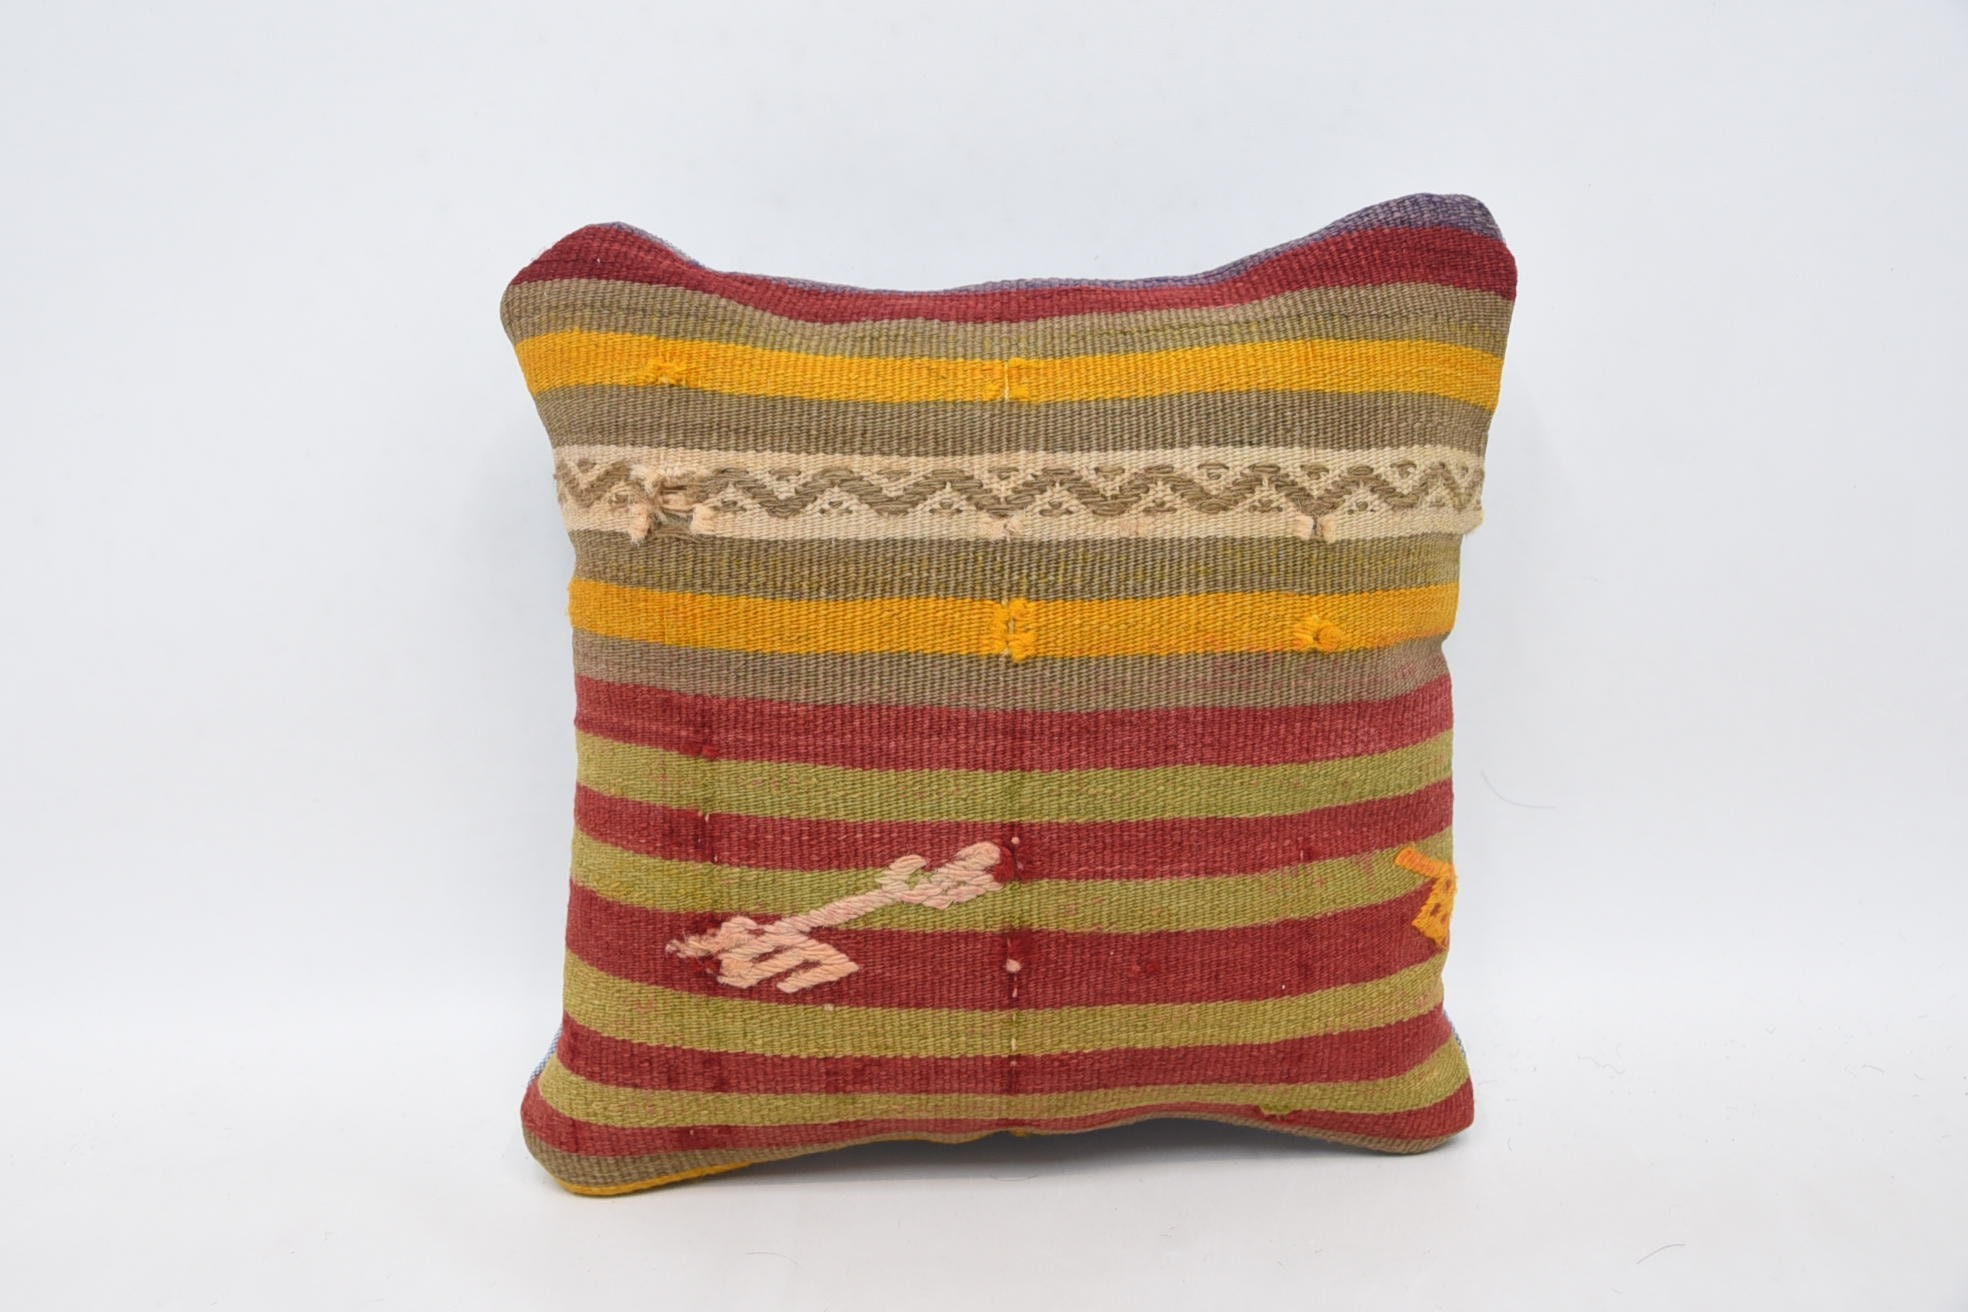 Pillow for Couch, Gift Pillow, 12"x12" Red Cushion, Vintage Pillow, Vintage Kilim Pillow Cushion Cover, Bench Pillow Case